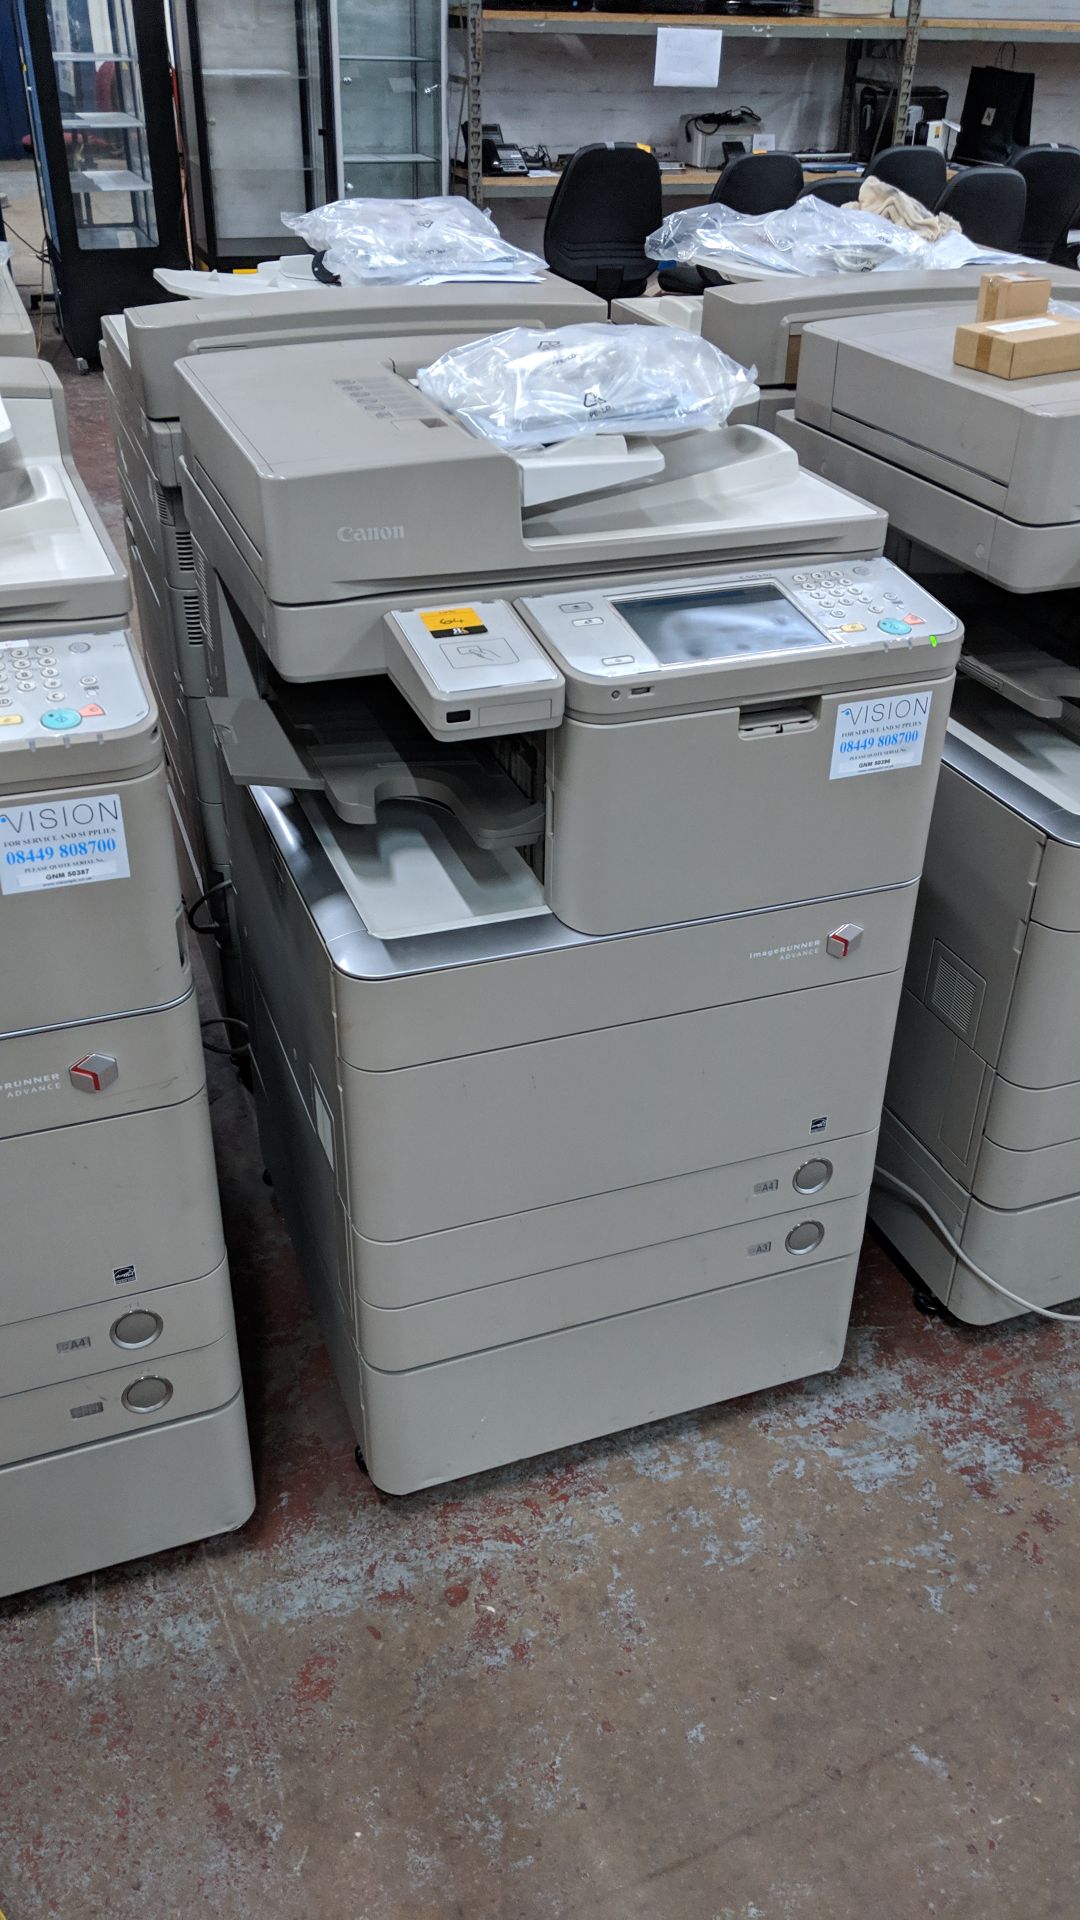 Canon imageRUNNER Advance model C5030i floorstanding copier with auto docufeed & pedestal